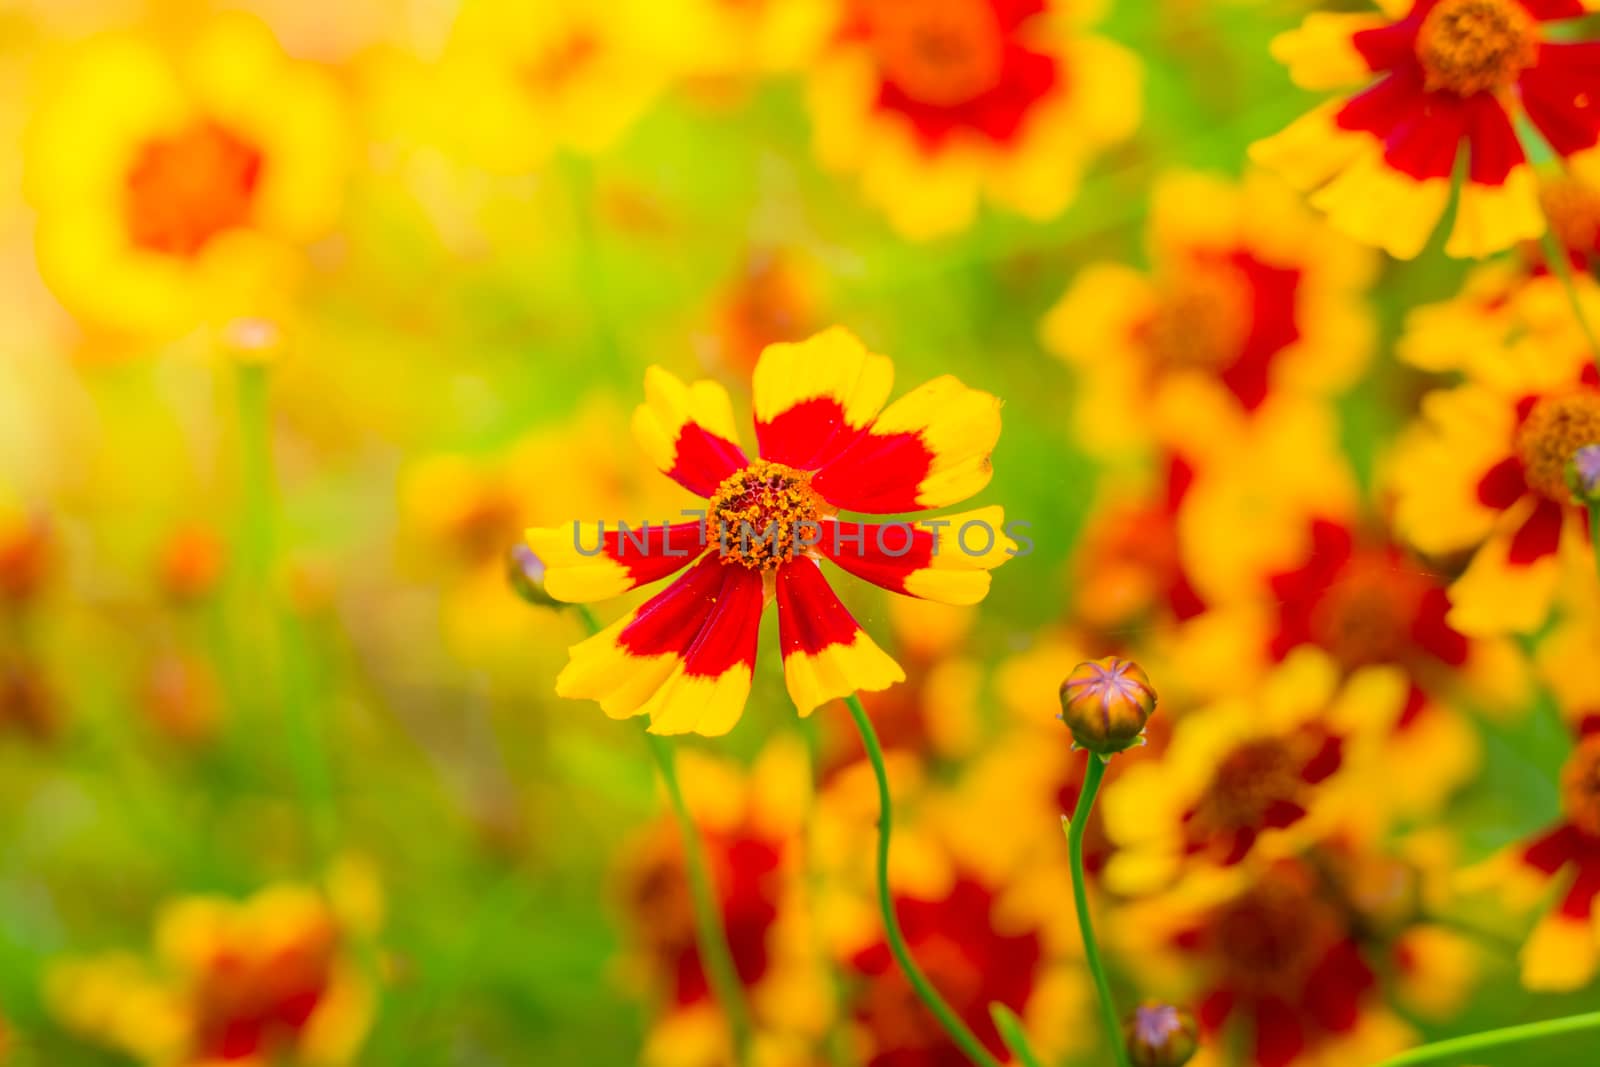 The background image of the colorful flowers by teerawit